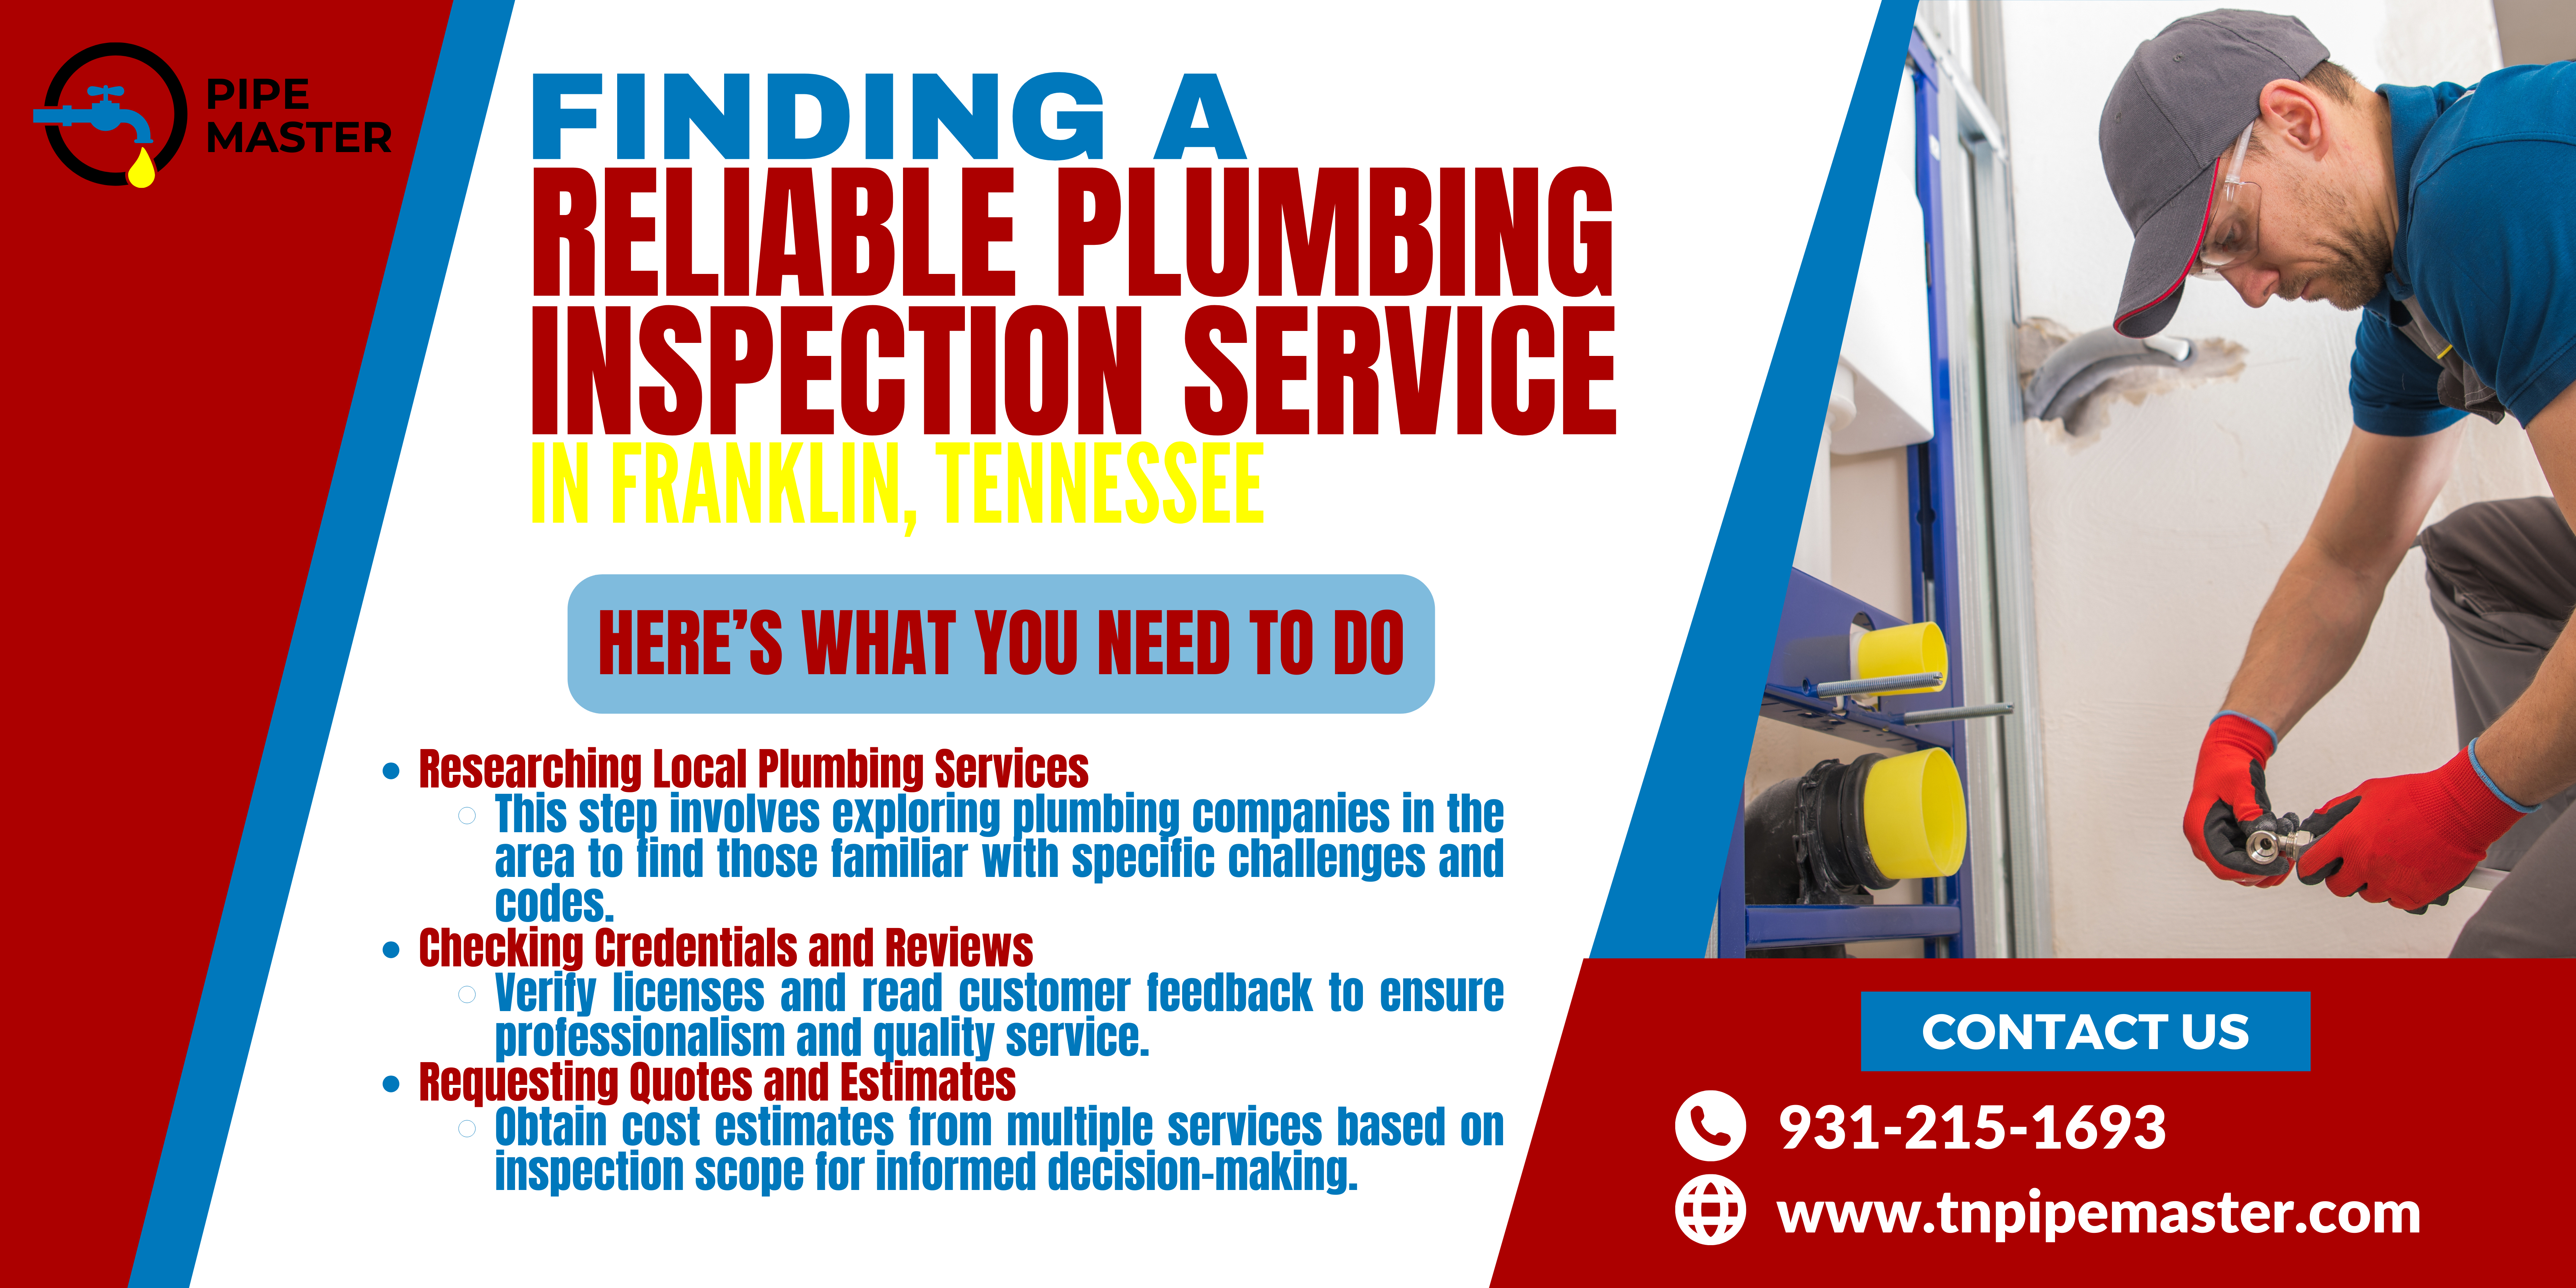 Signs You Need a Plumbing Inspection